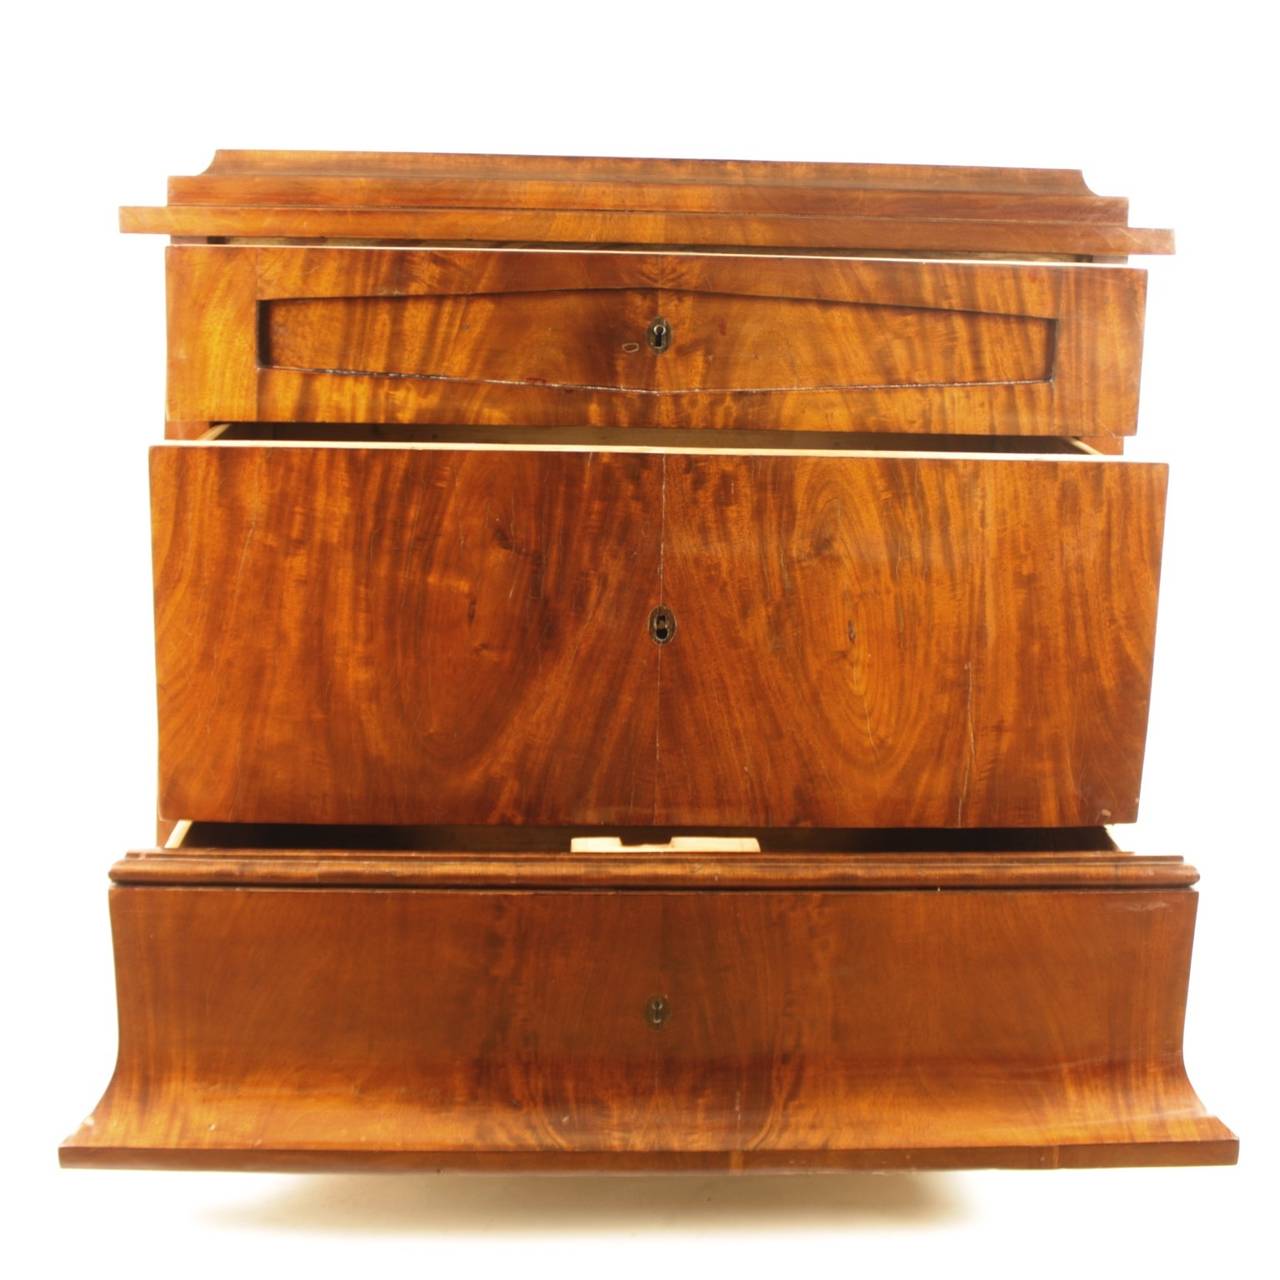 Biedermeier commode with tapering breakfront corpus and stepped pediment, with three long drawers on block feet. The whole veneered with mahogany on pine in book-match pattern - the wood with its grain configuration being the most important motif of